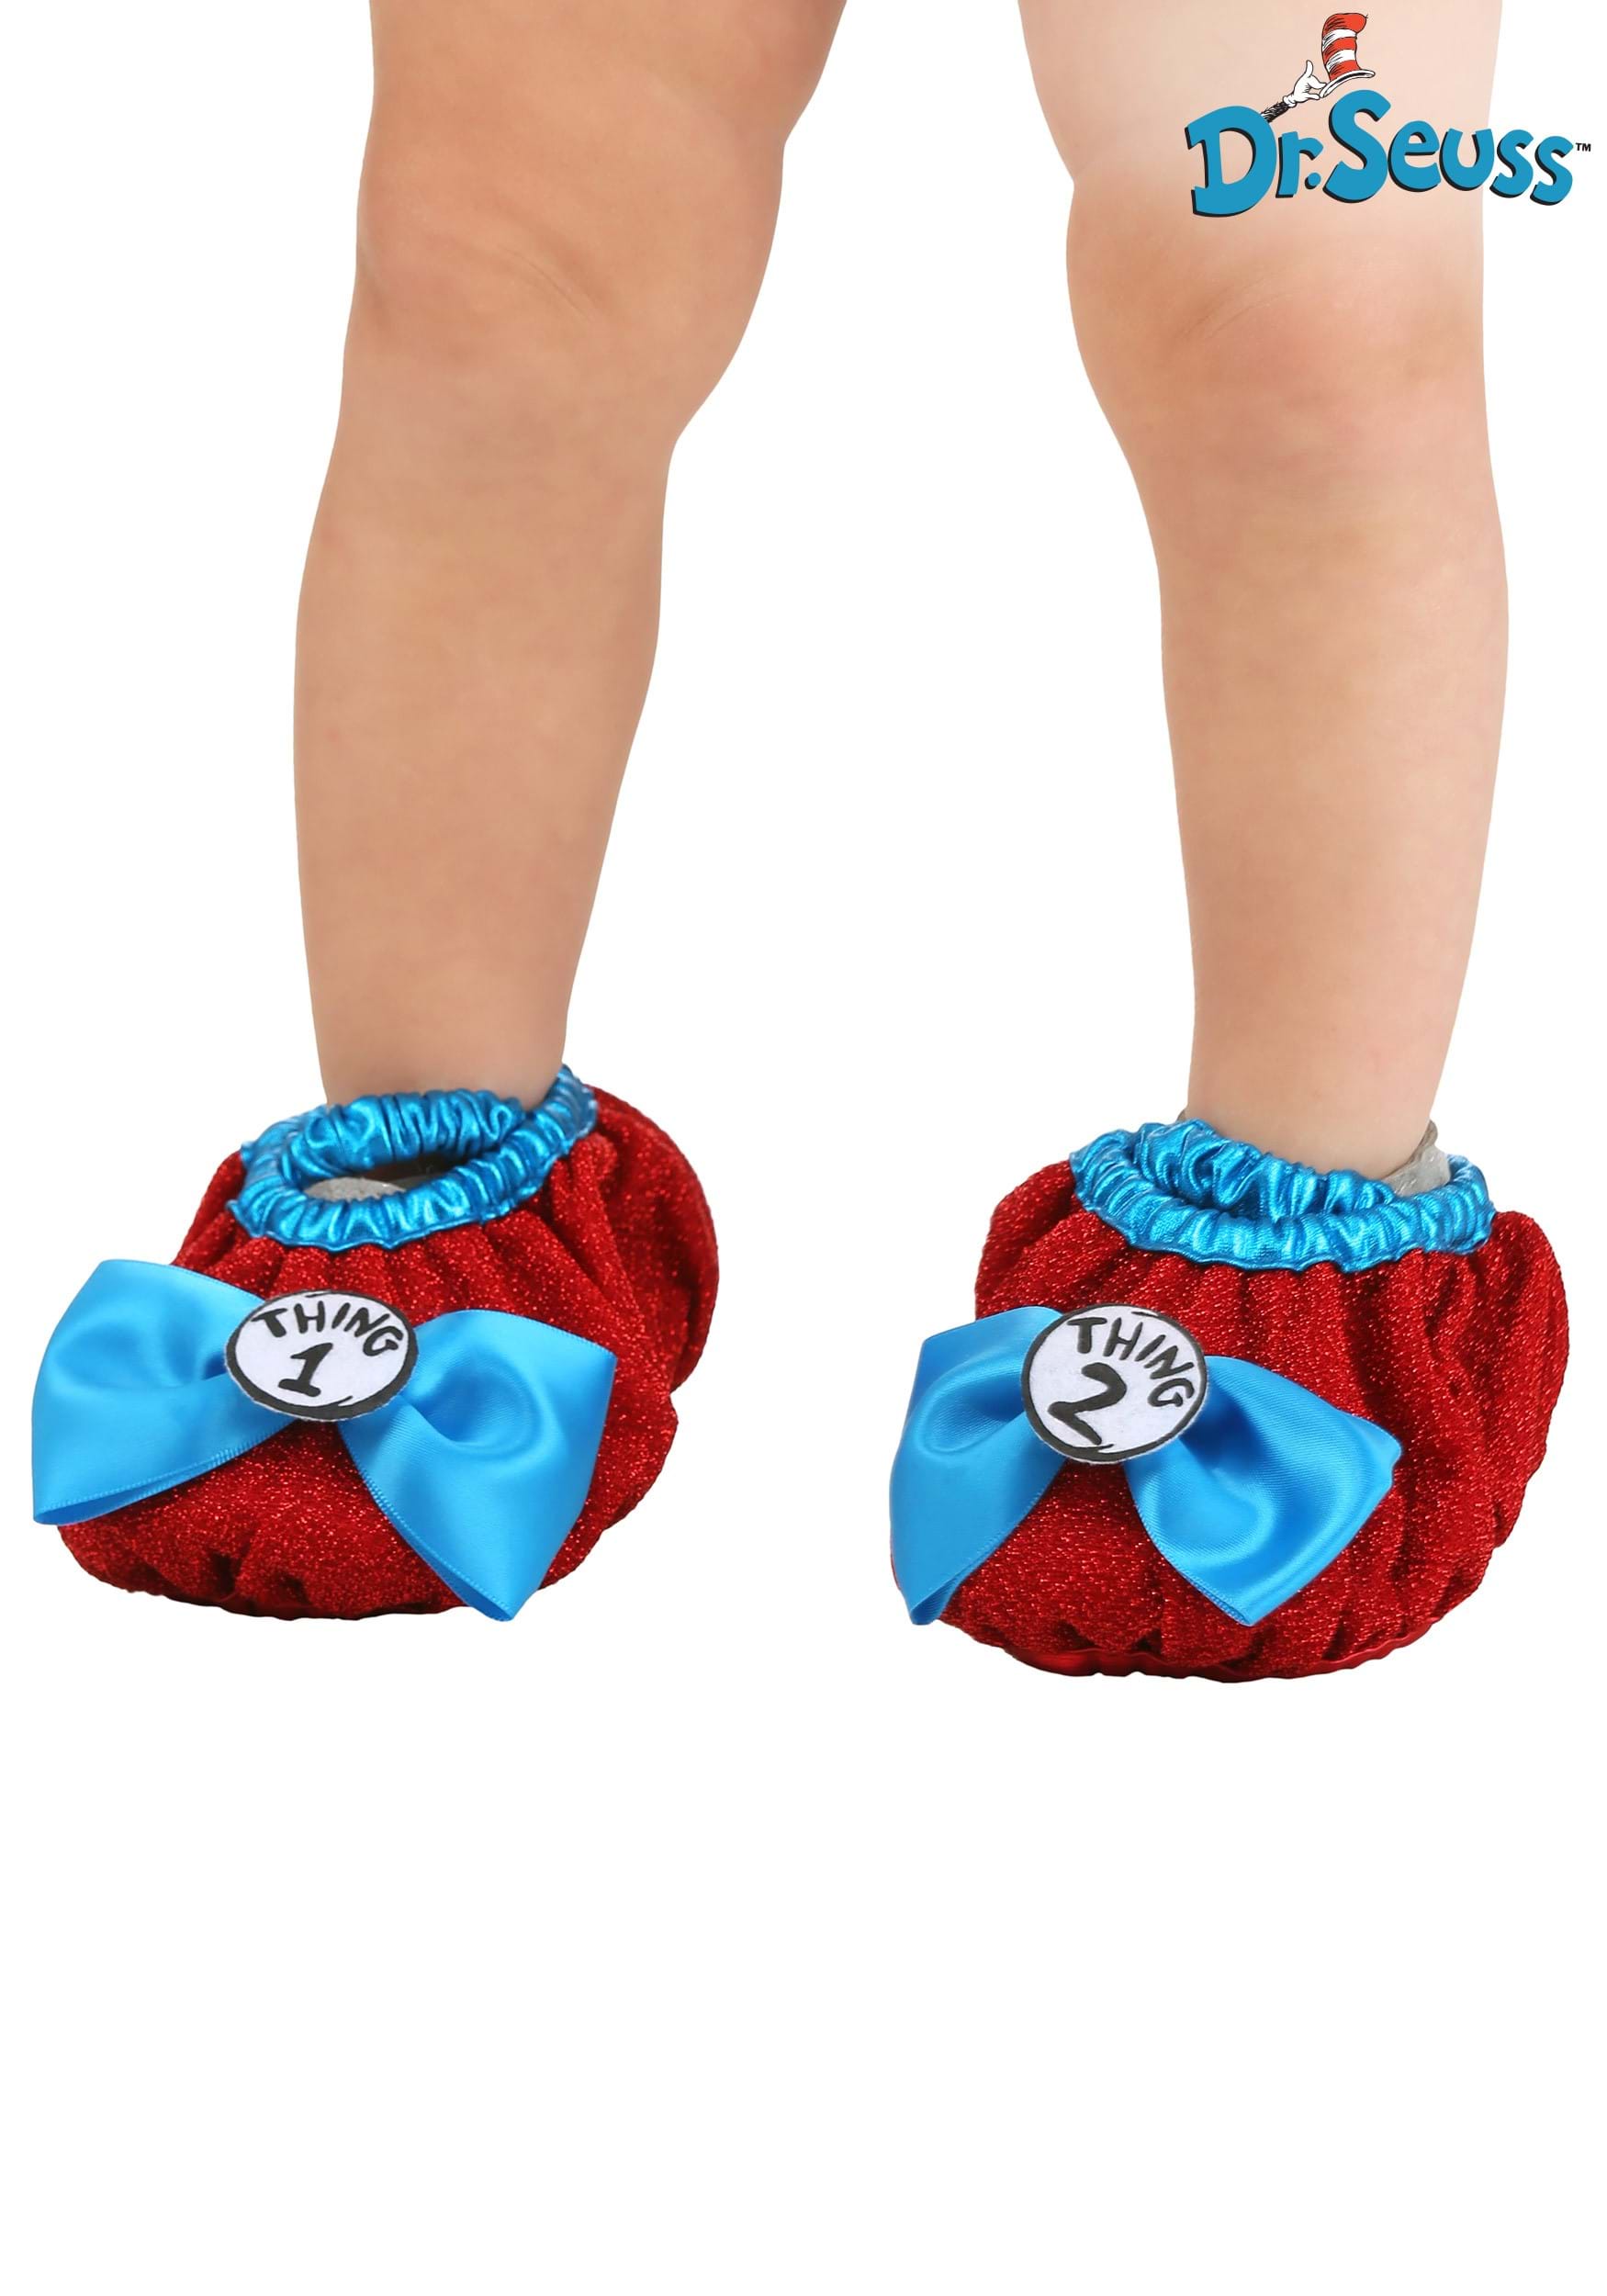 Thing 1 & 2 from Cat in the Hat Kids Costume Shoe Covers Red Sparkle Shiny